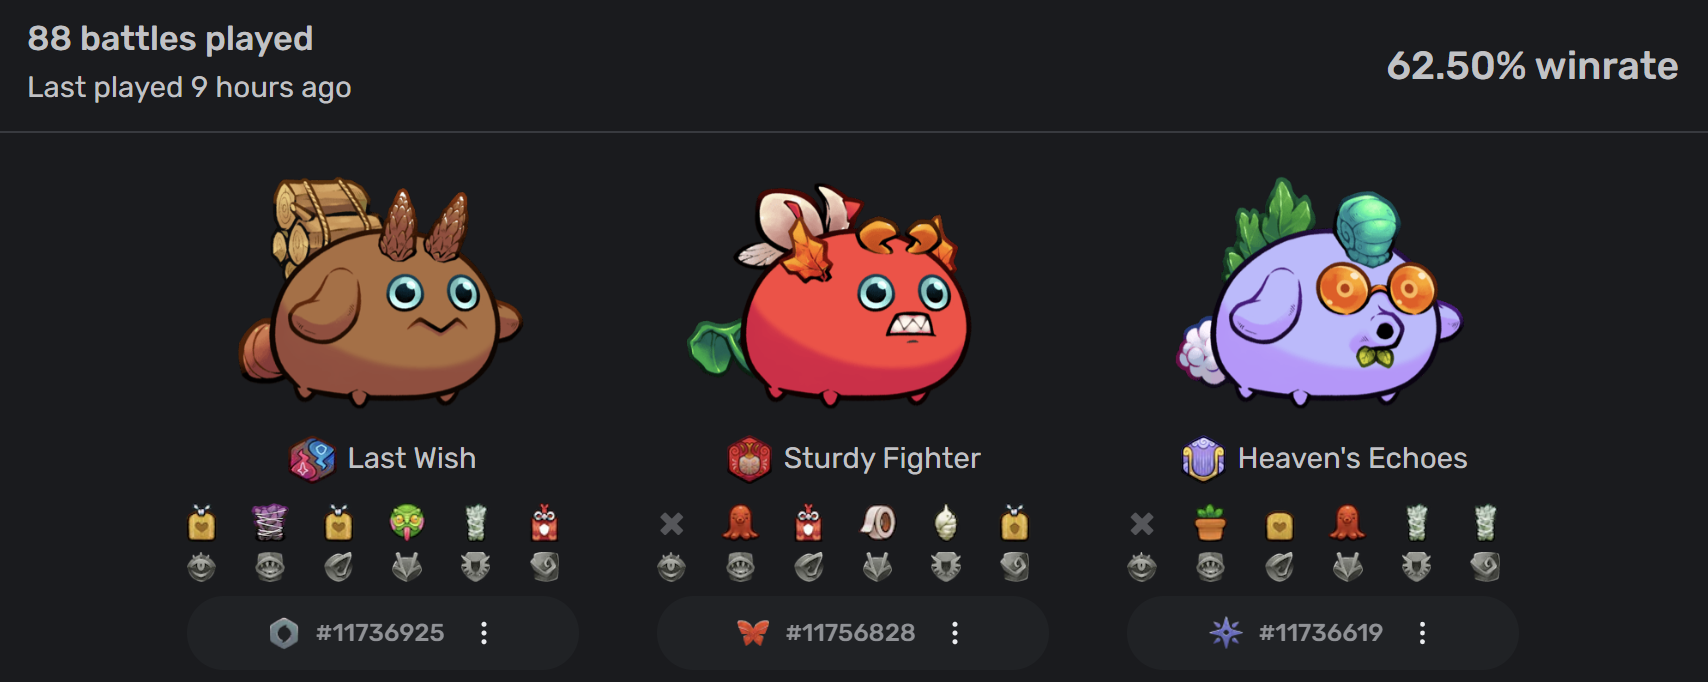 Example of Pure Damage Sturdy Fighter team (screenshot from axies.io)